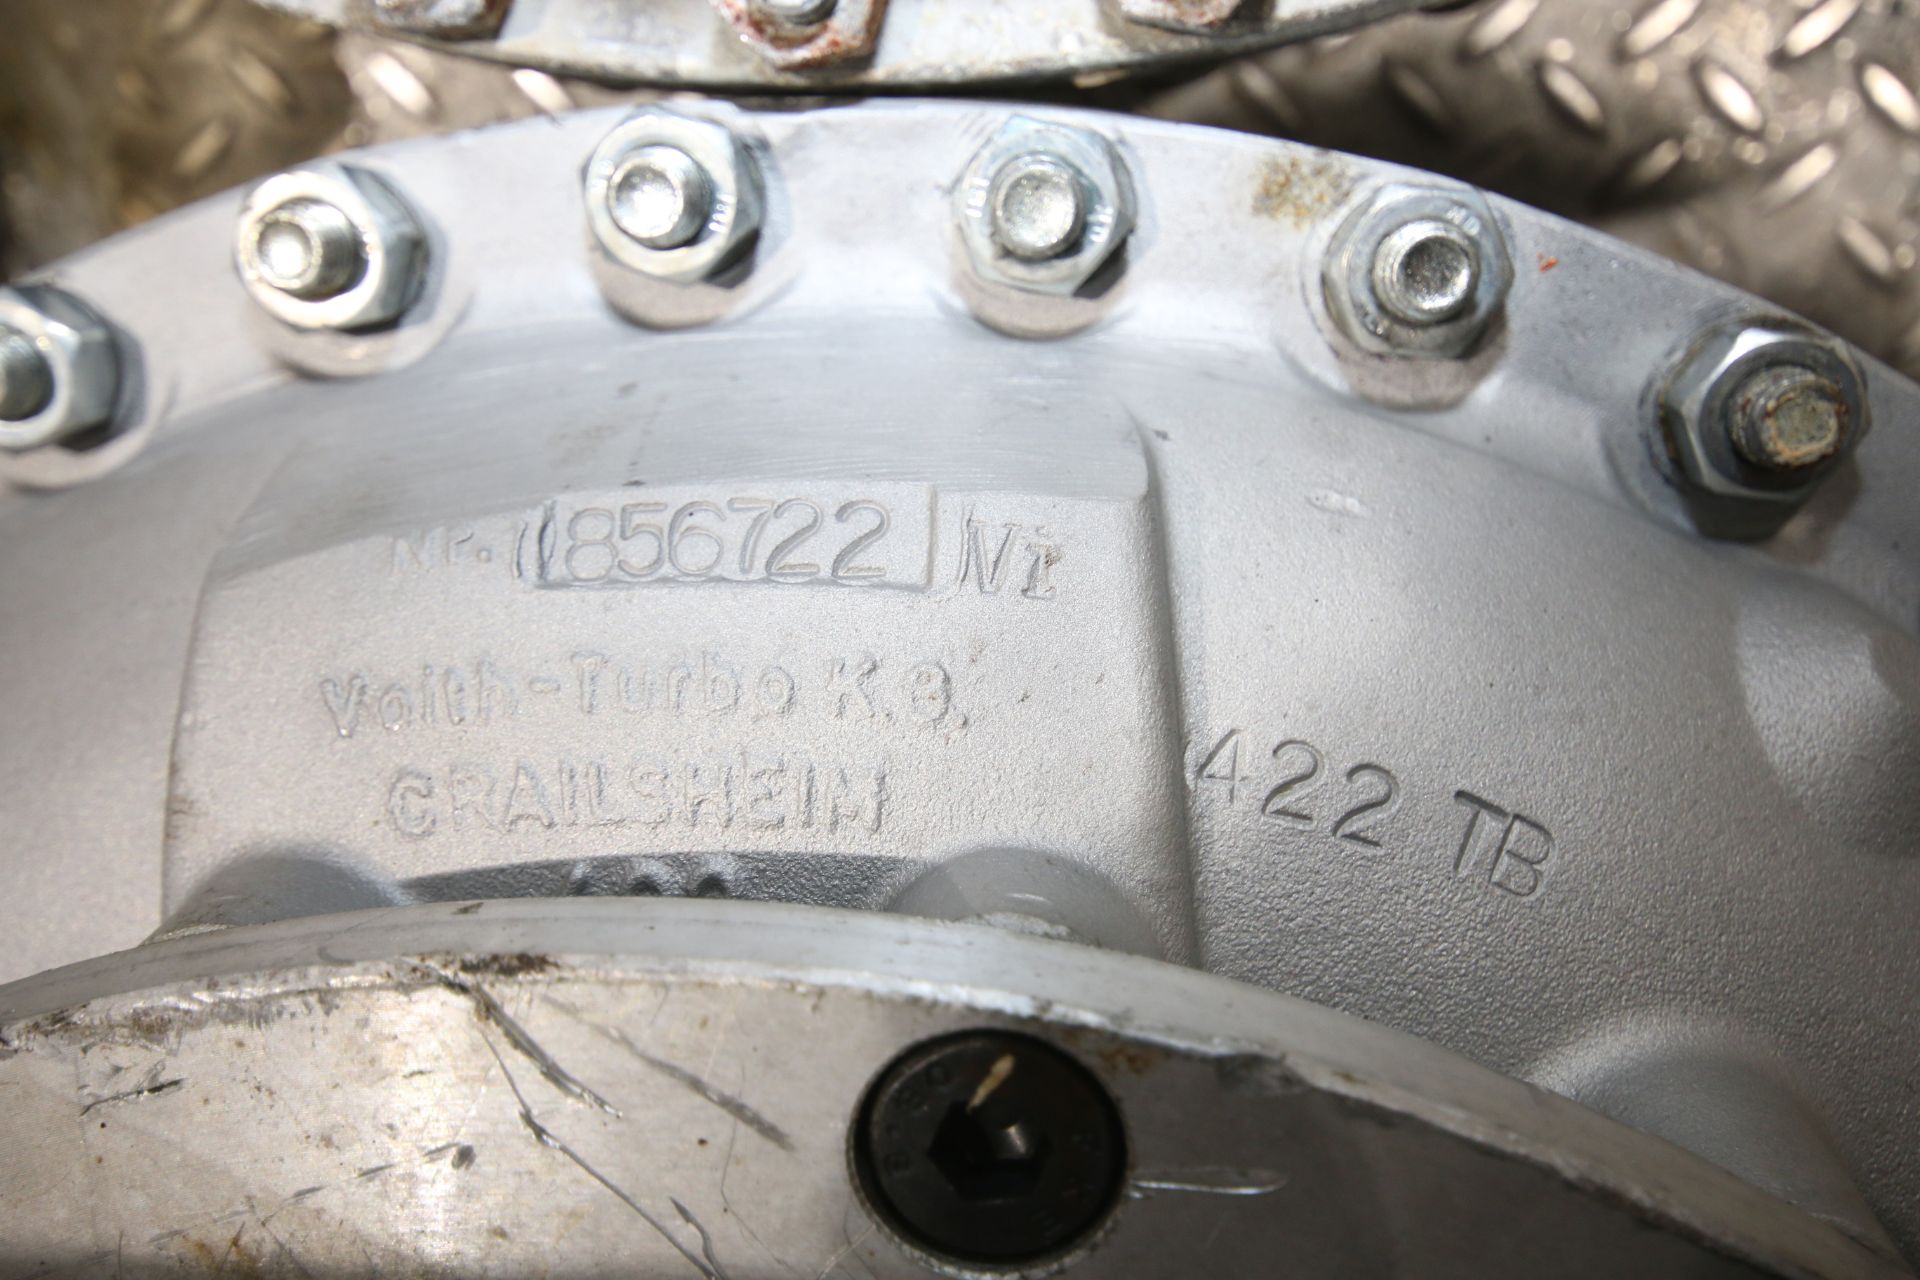 GEA/Westfalia MSB170 and Other Separator/Centrifuge Clutch, Type 422TB, Part #856722 (Note: - Image 2 of 2